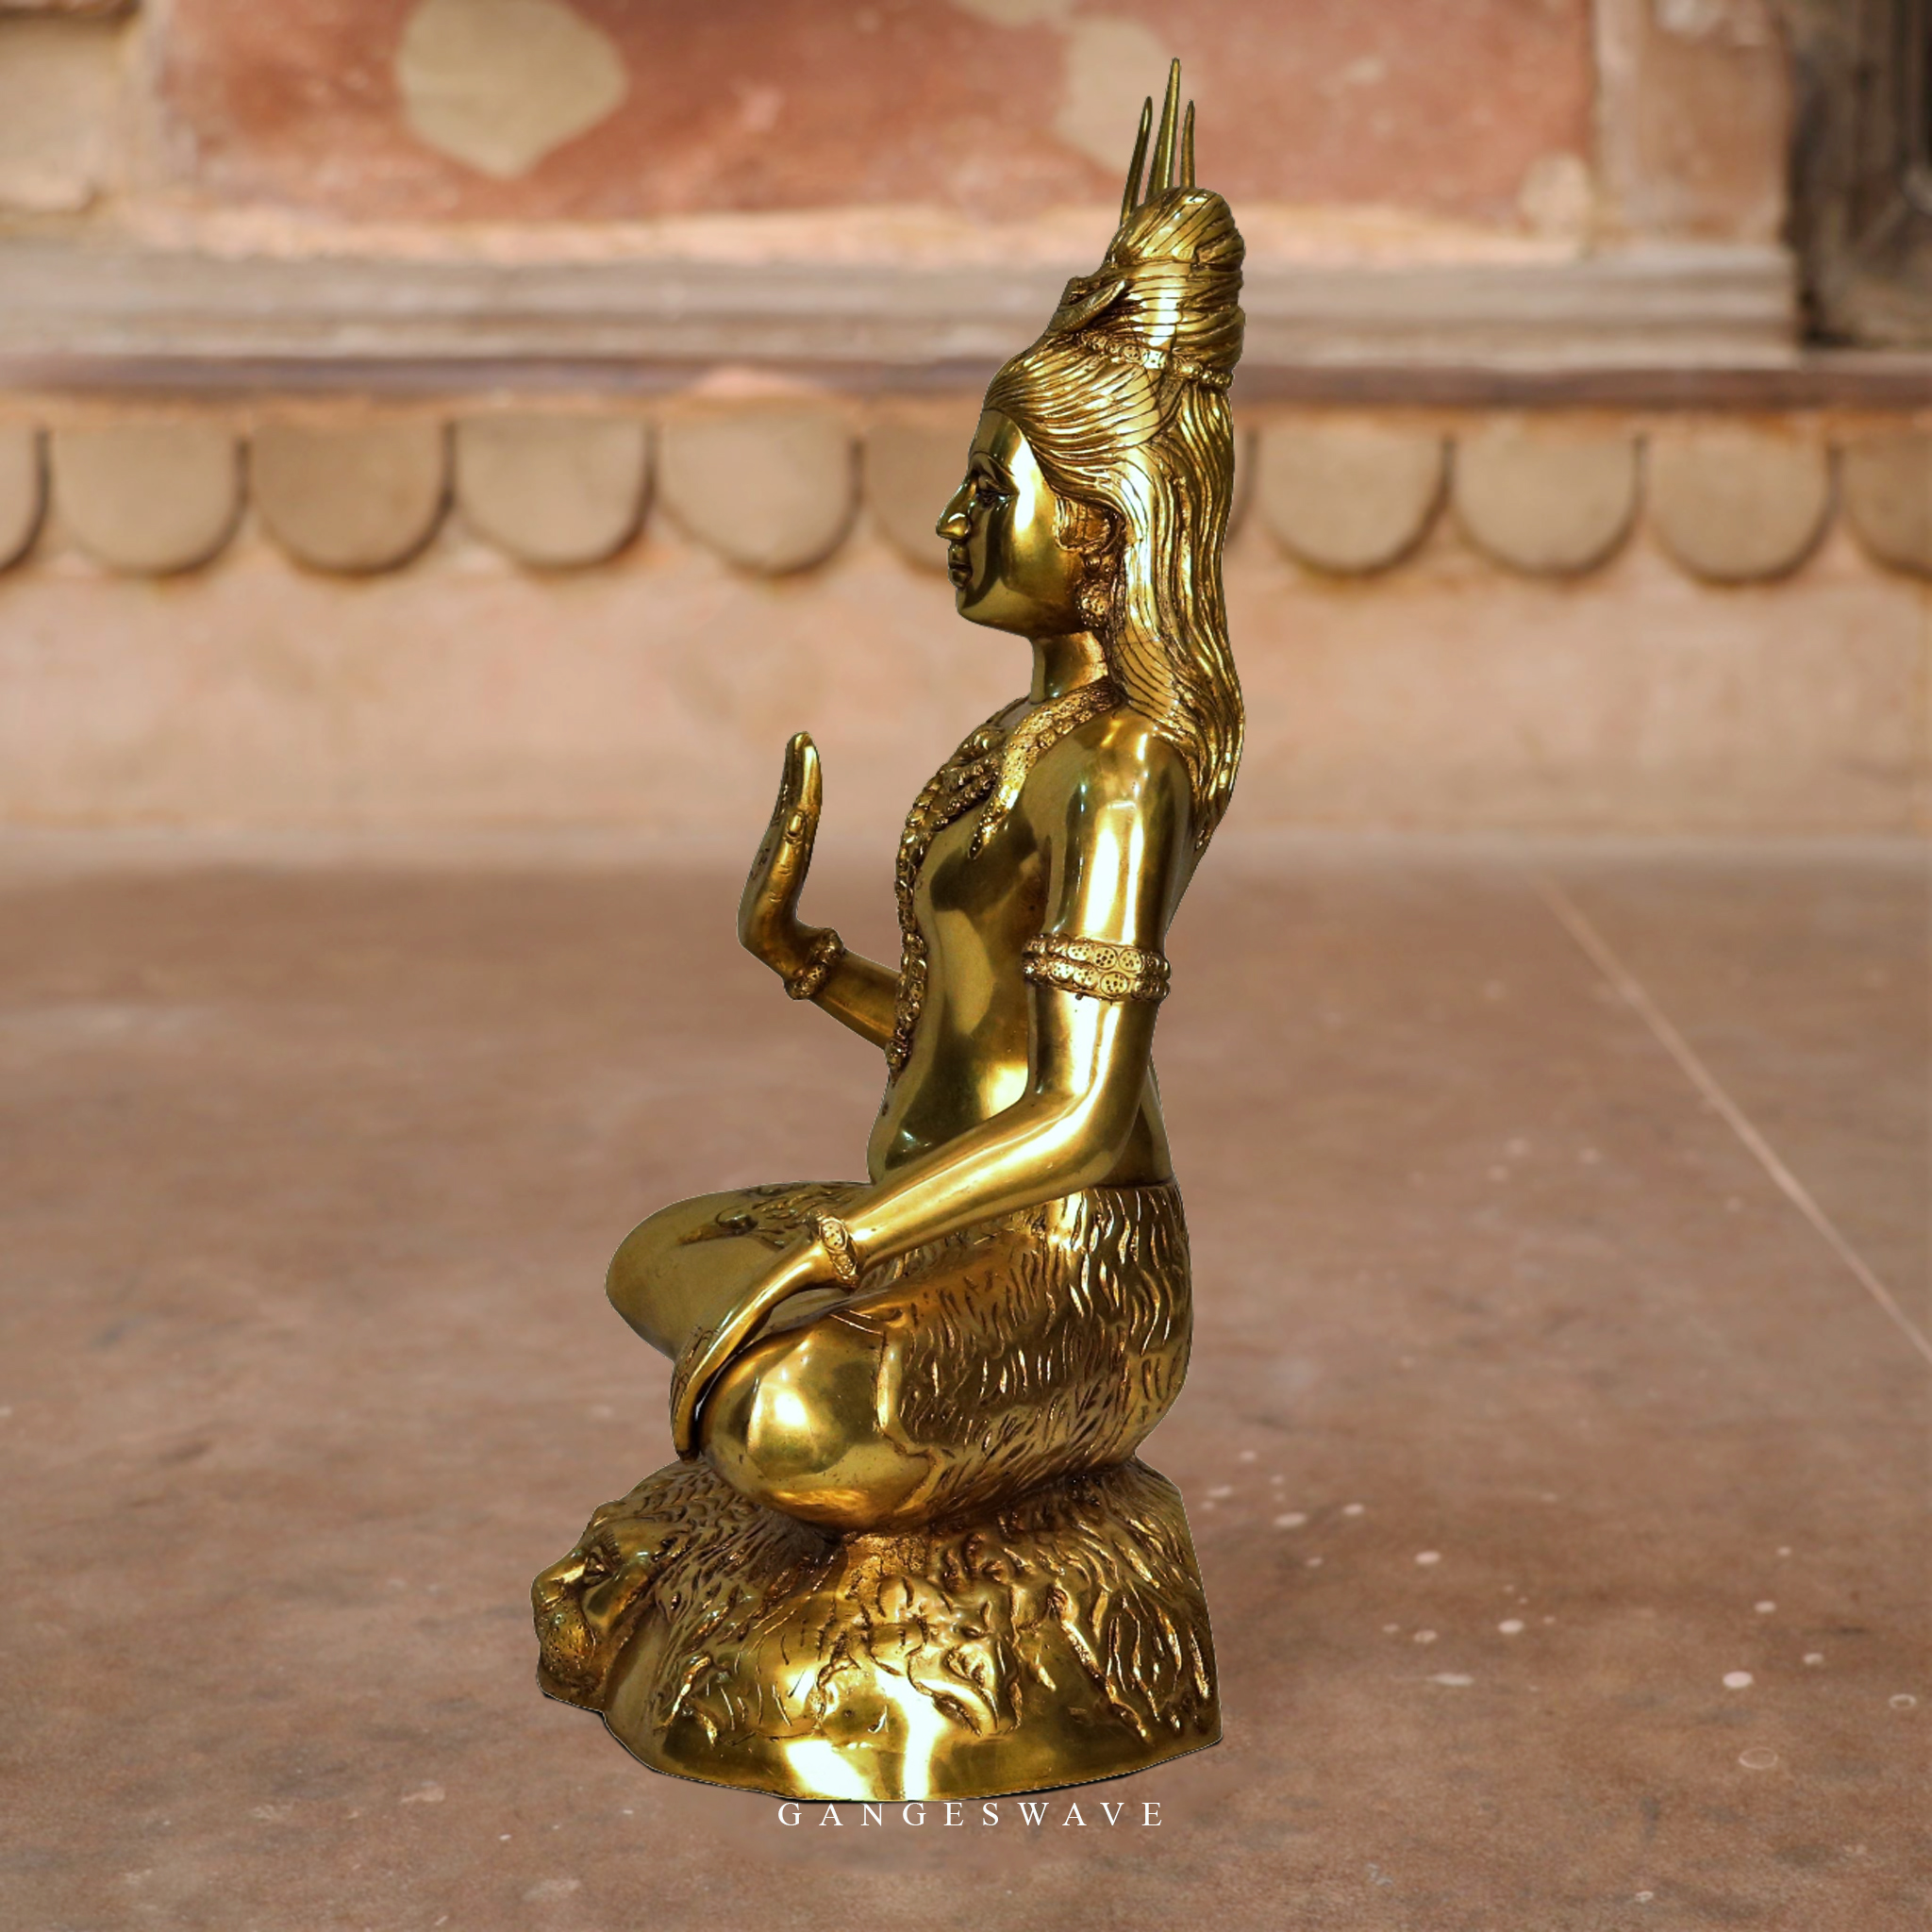 LORD SHIVA BRASS STATUE - Buy exclusive brass statues